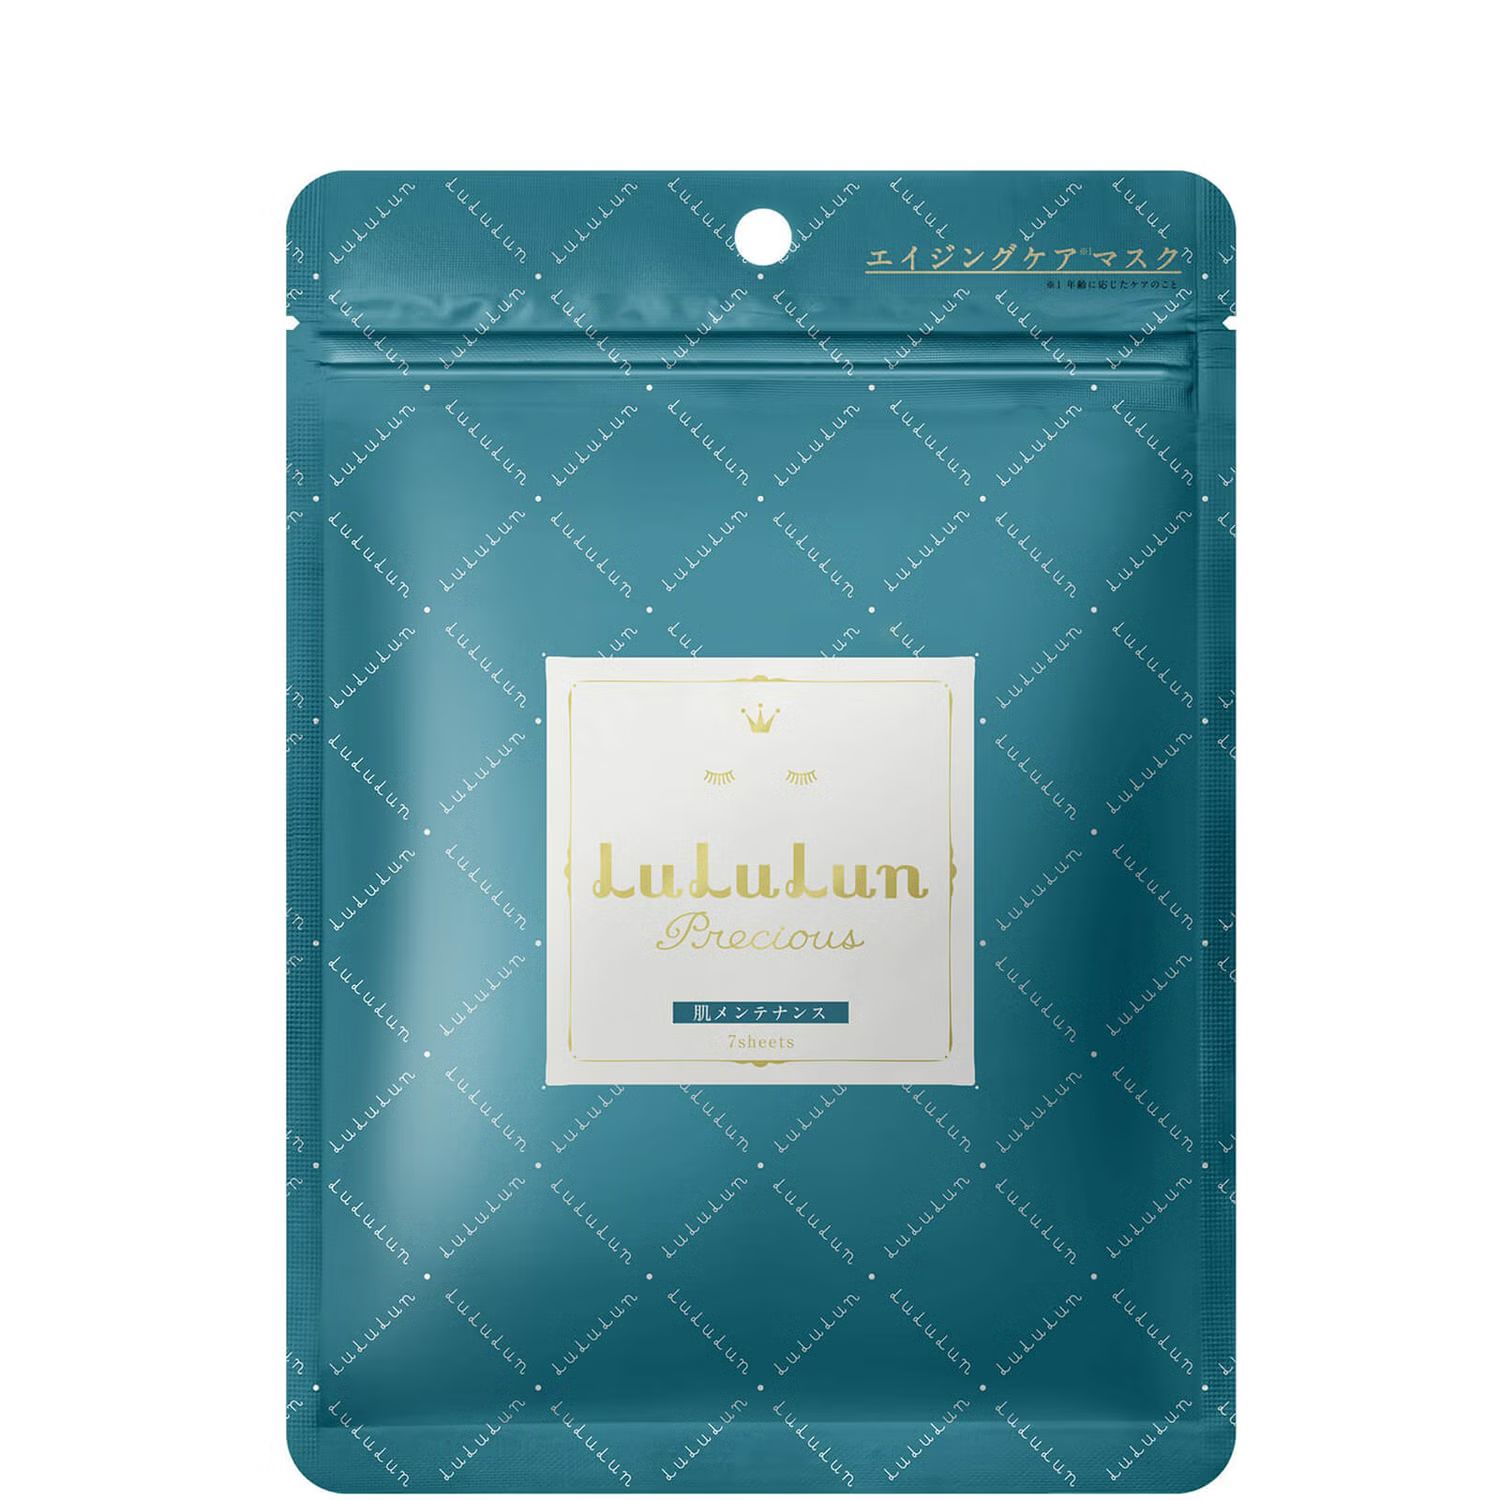 Lululun Precious Face Mask - Green (7 Sheets) | Skincare RX